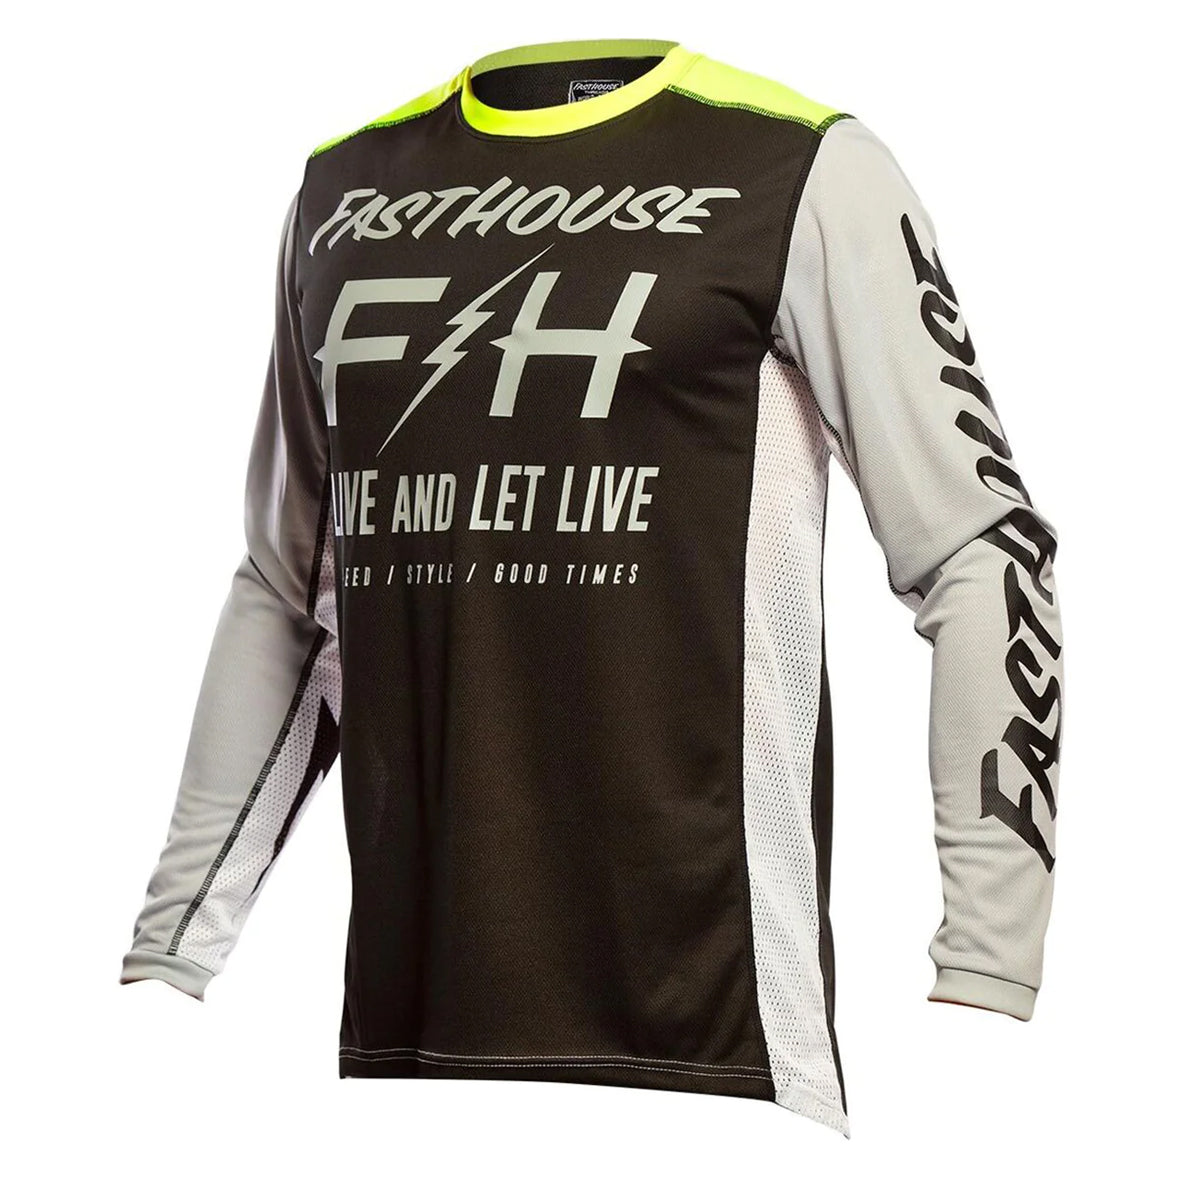 FFasthouse Grindhouse Clyde LS Men's Off-Road Jerseys